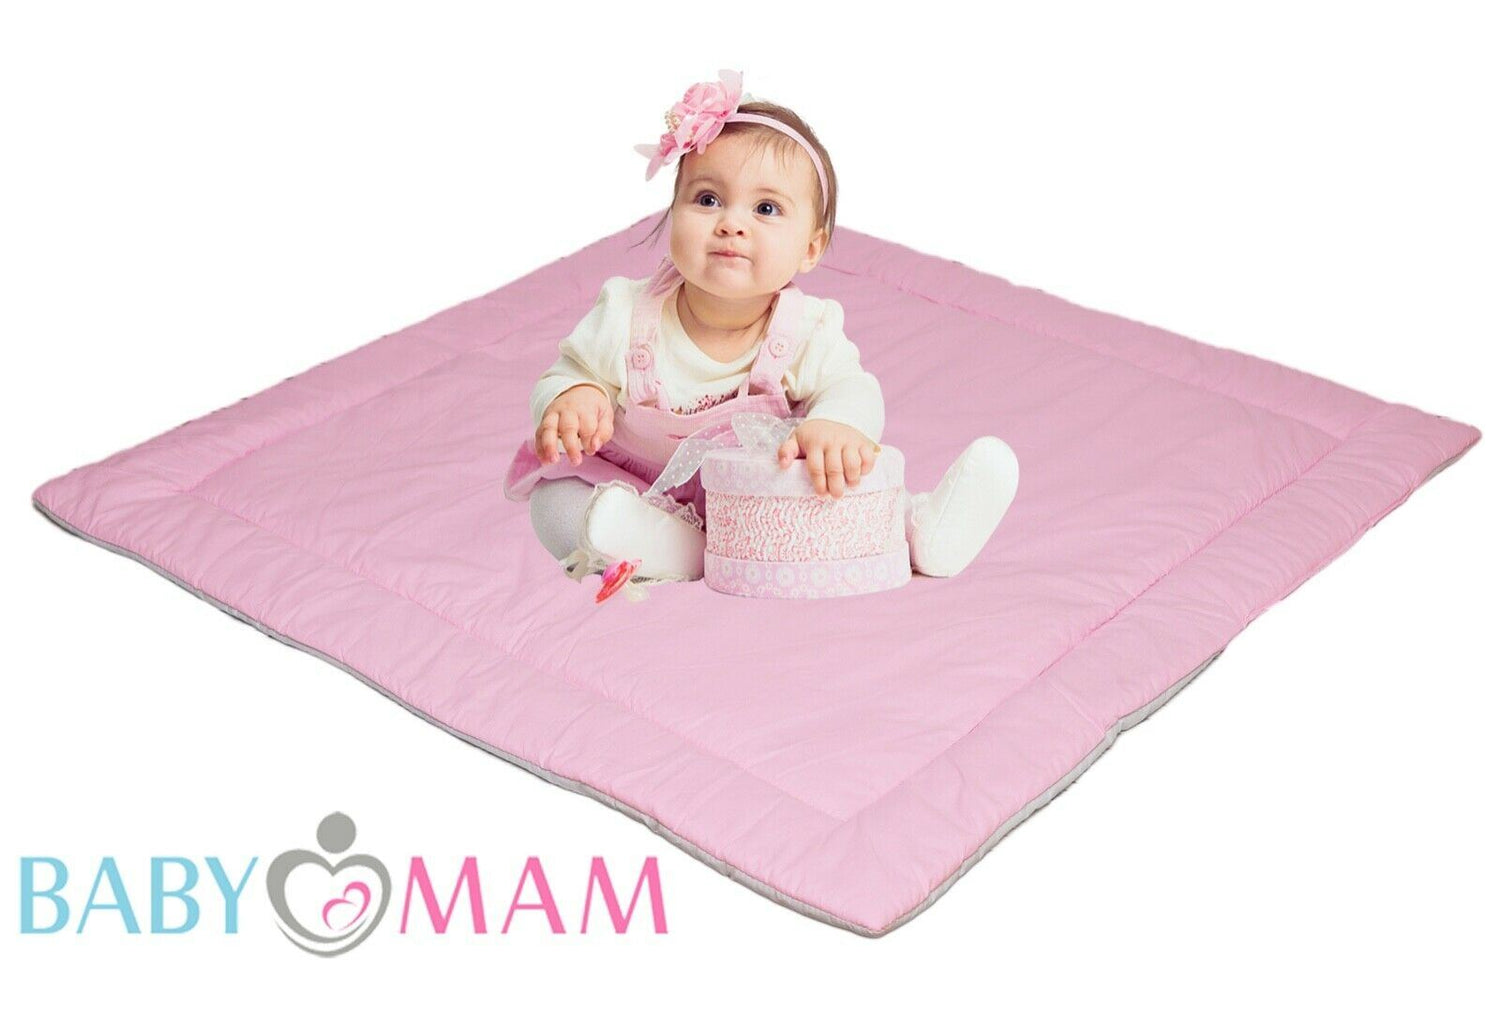 Teepee floor Double sided Cotton Padded Baby Kids Play Mat Princess castle